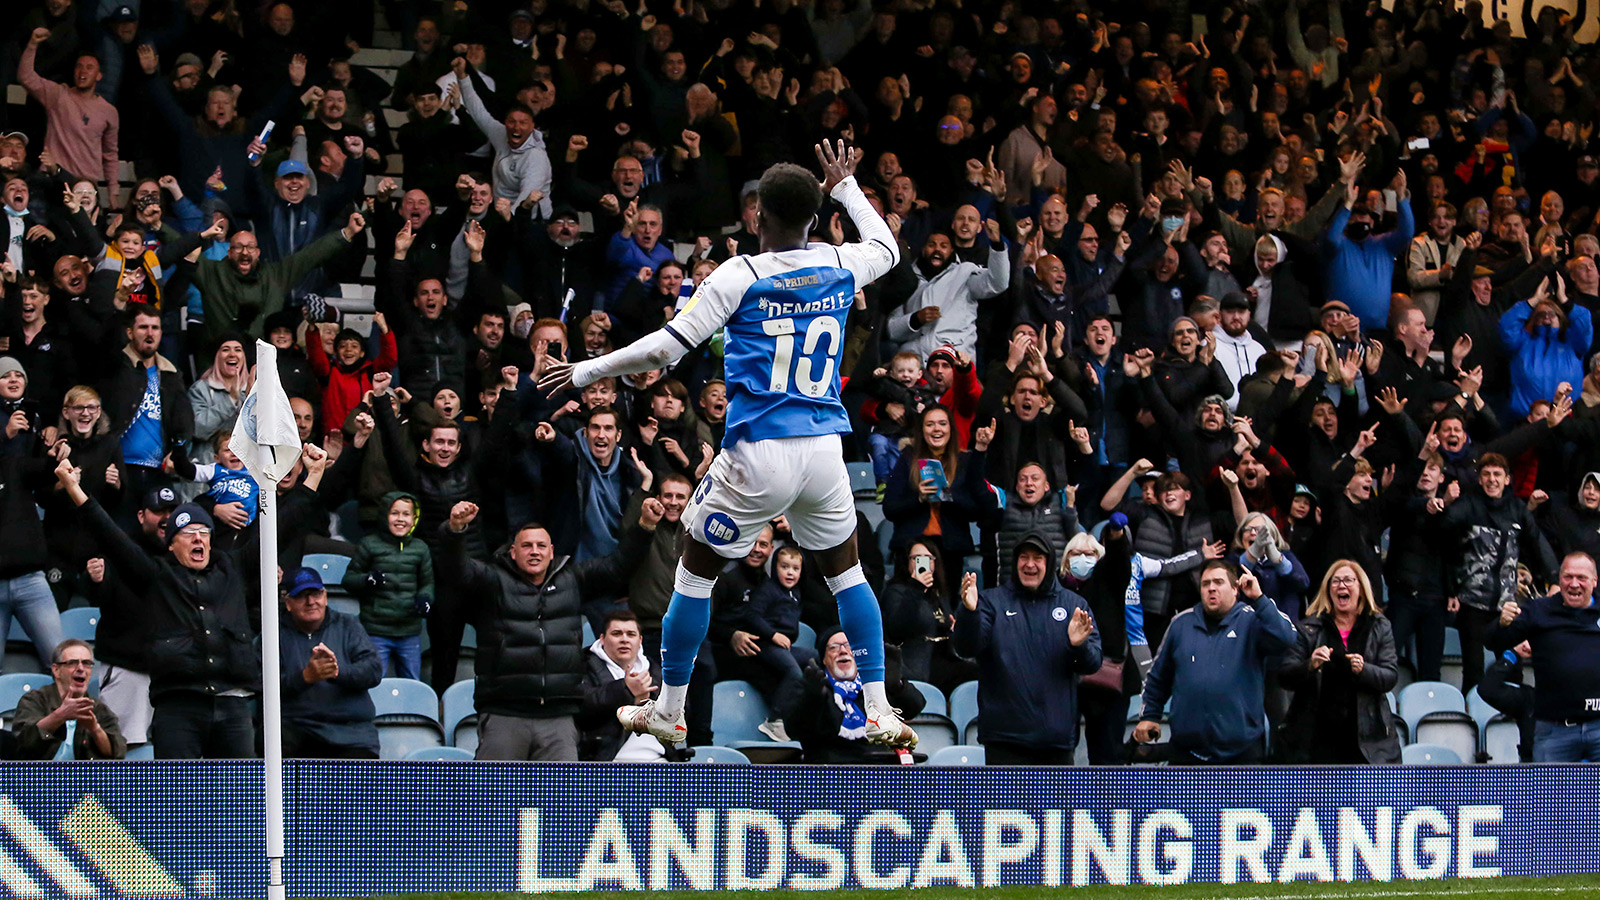 23rd October '21 | Siriki Dembele jumps for joy after scoring a late winner over QPR at the Weston Homes Stadium